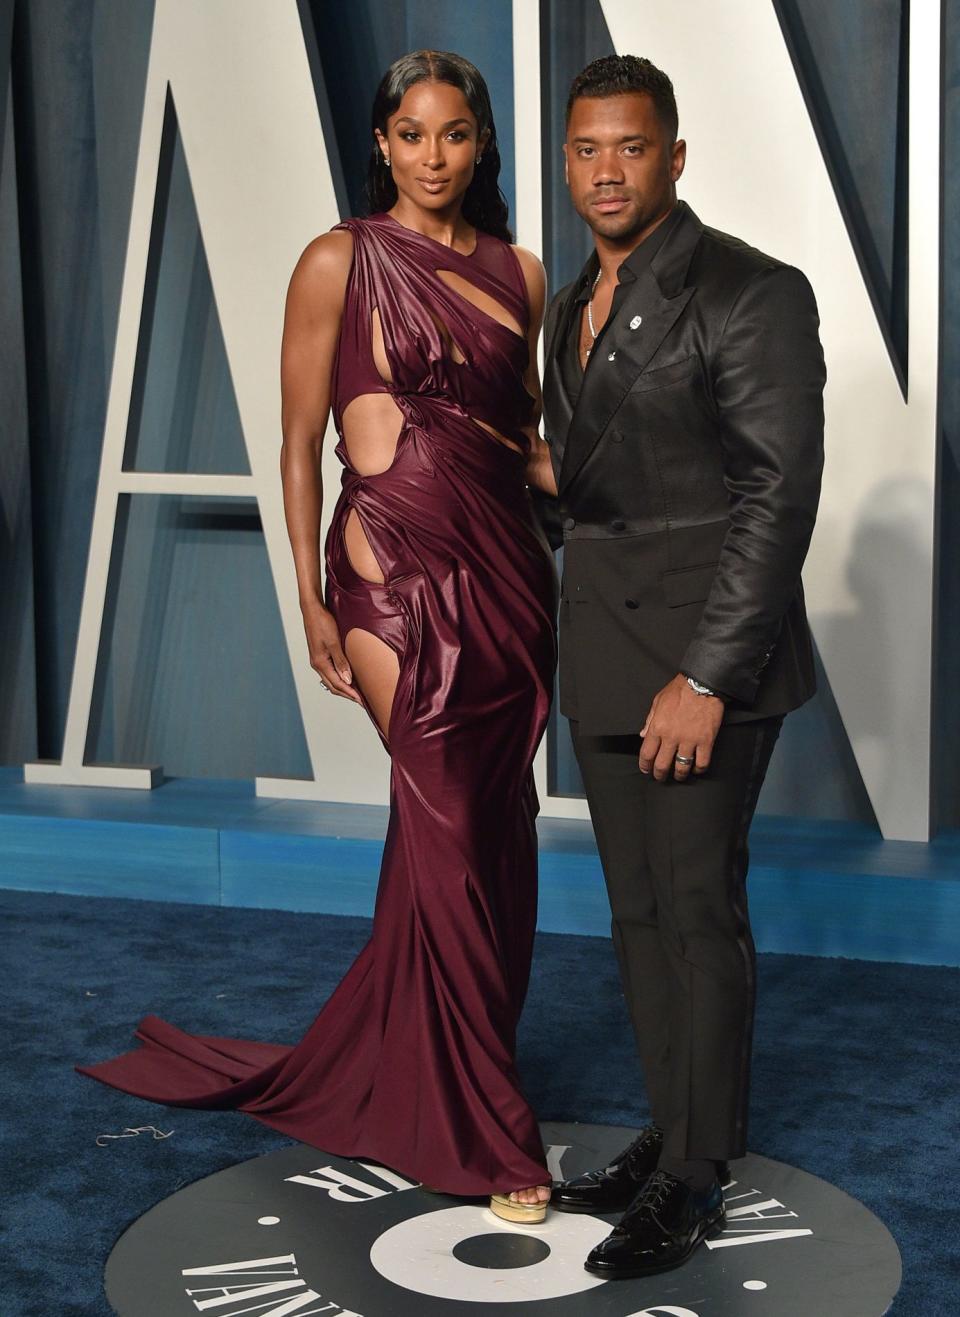 Russell Wilson and Ciara at the Vanity Fair Oscars After Party. - Credit: OConnor-Arroyo/AFF-USA.com / MEGA